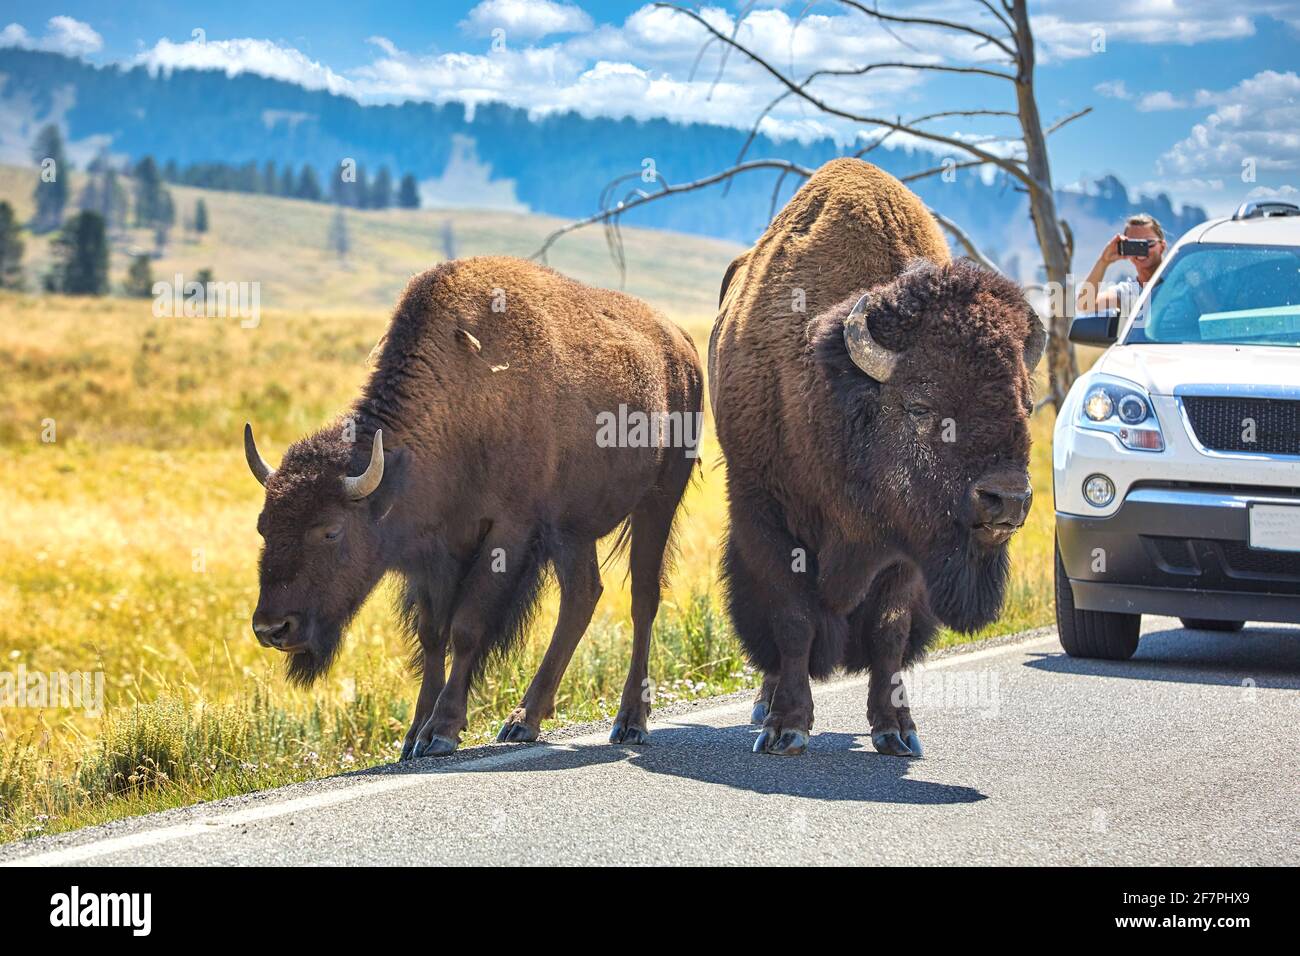 Tourist taking a picture of bisons crossing road In the Yellowstone National Park. Wyoming. USA. Stock Photo